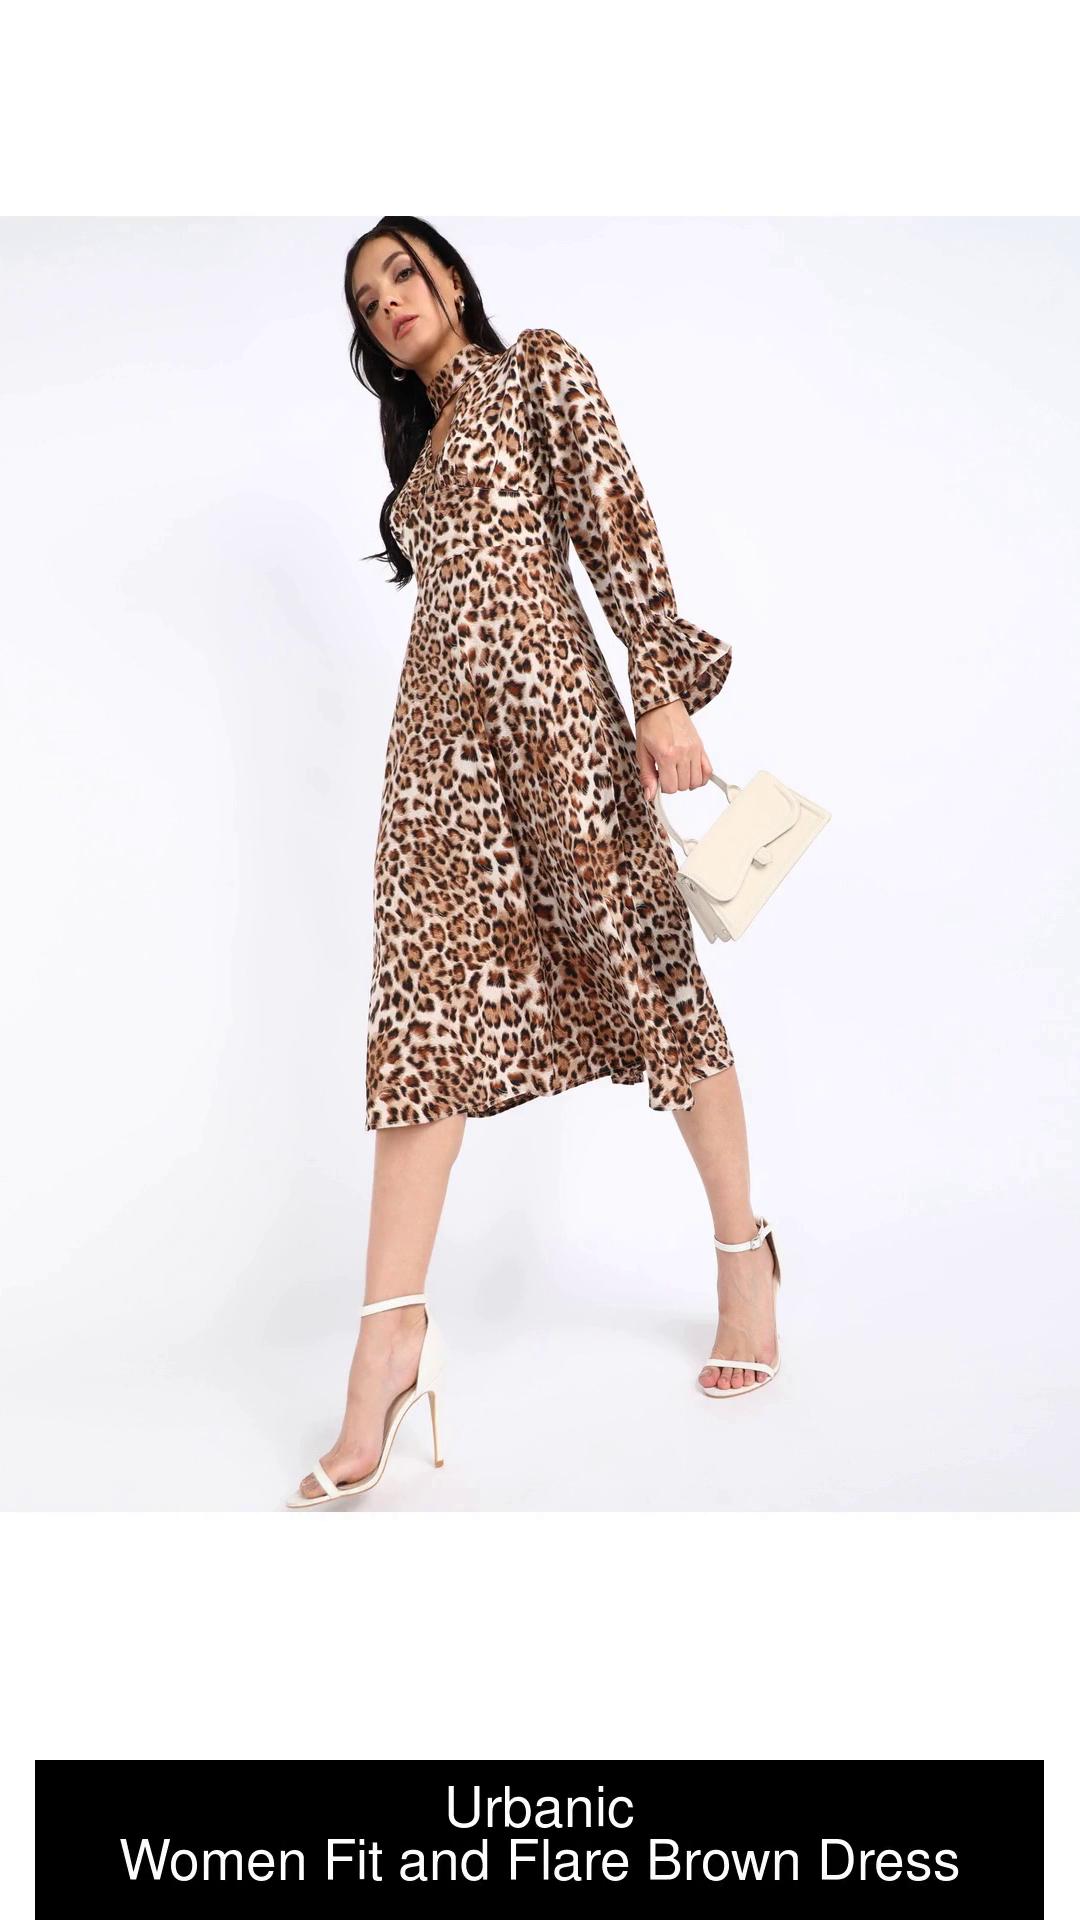 Urbanic Women Fit and Flare Beige, Brown Dress - Buy Urbanic Women Fit and  Flare Beige, Brown Dress Online at Best Prices in India